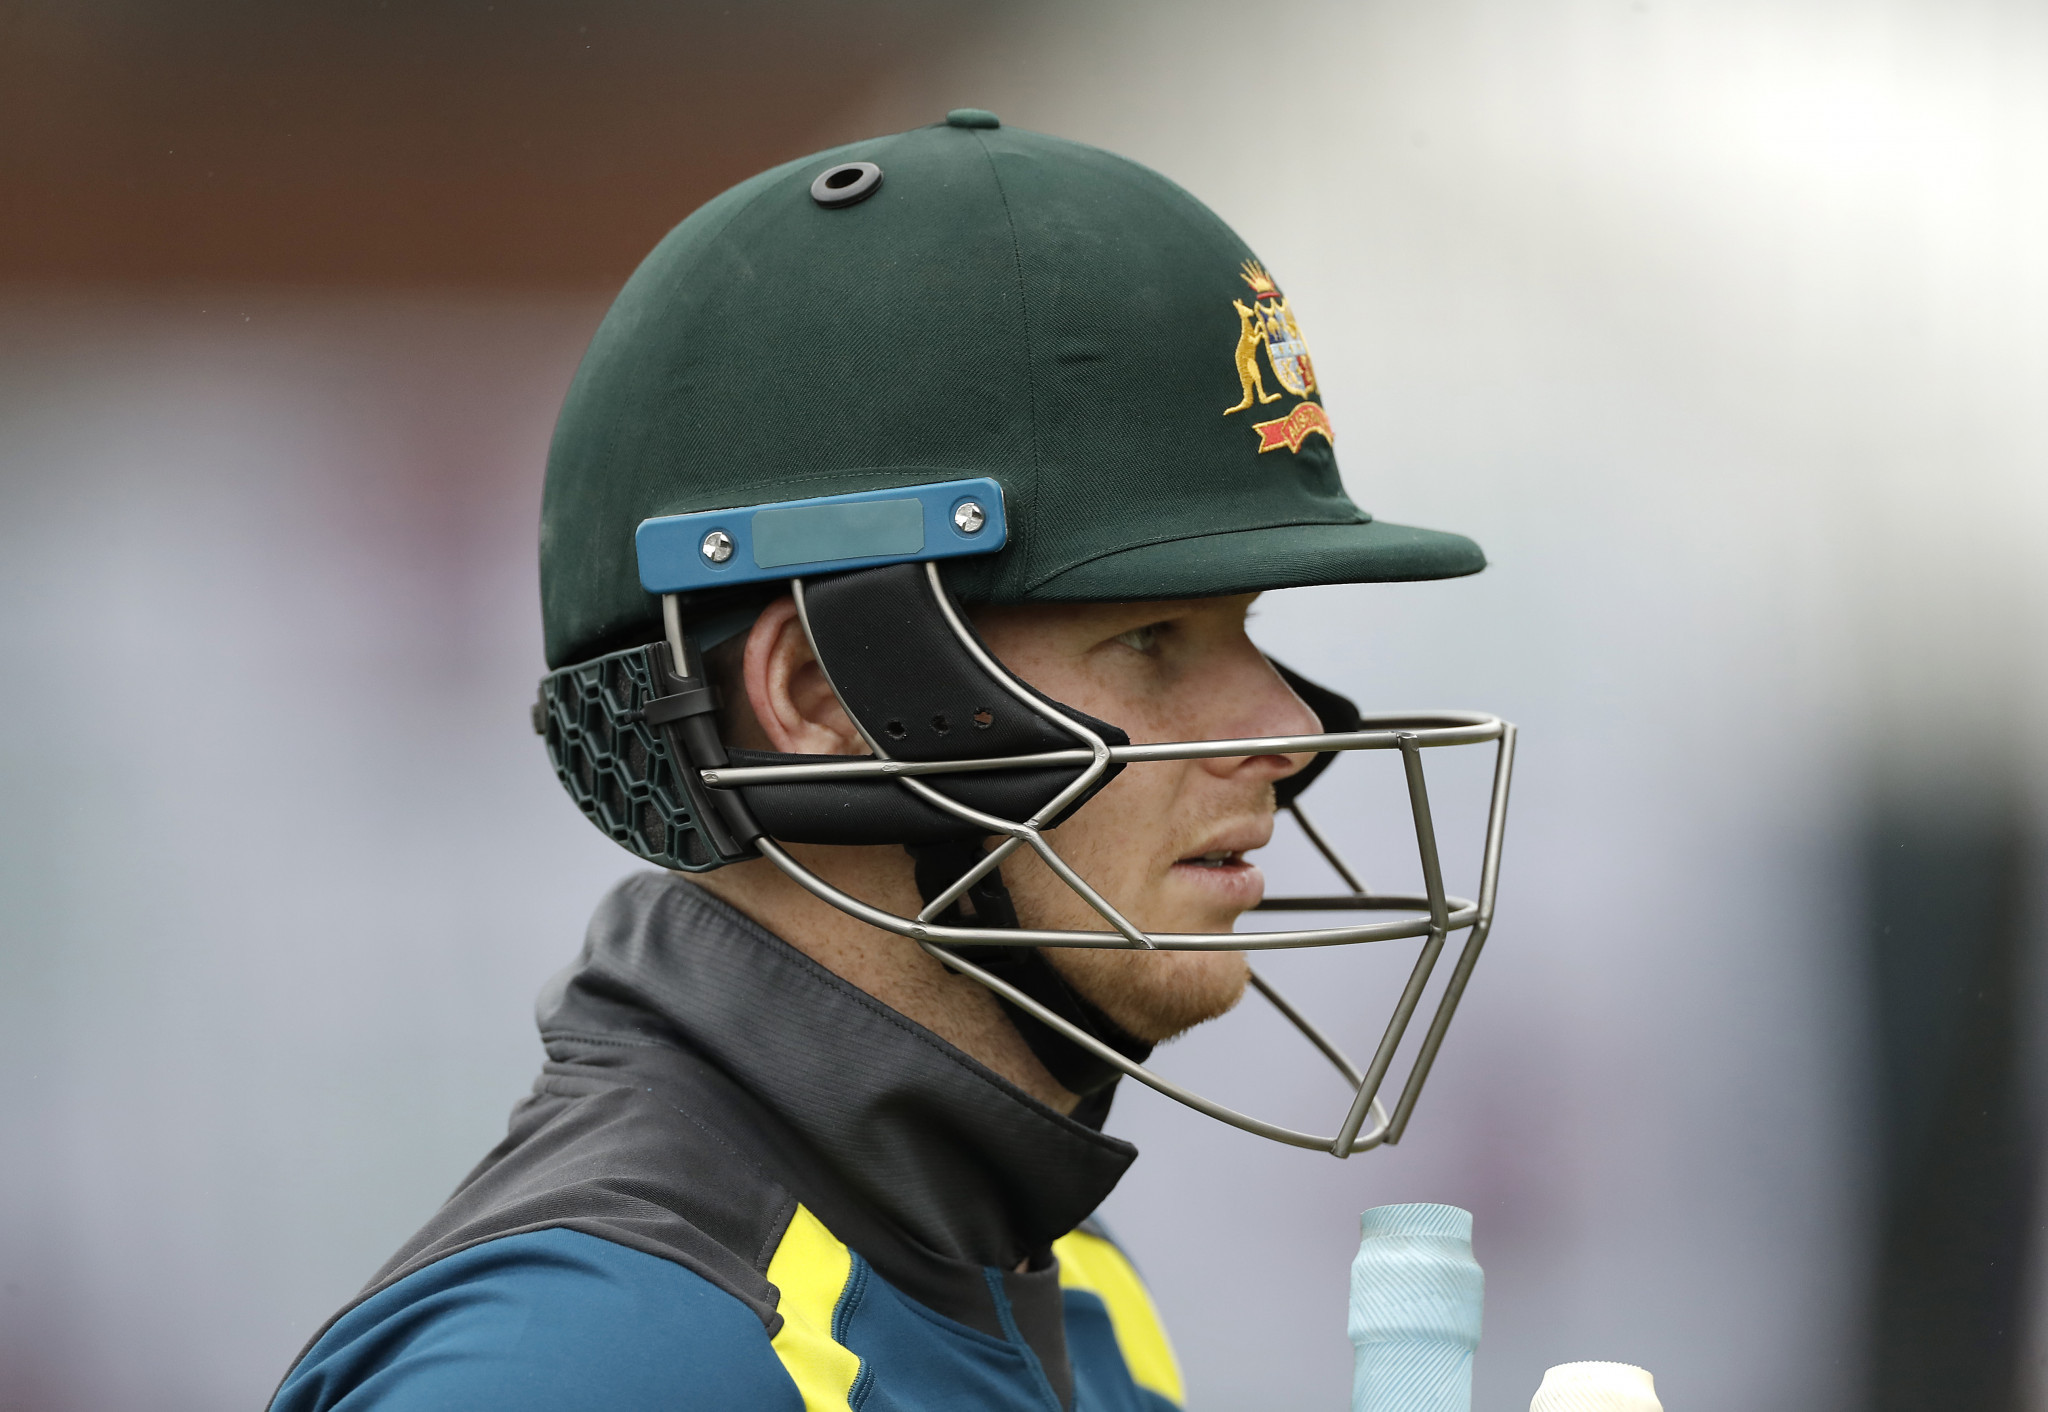 Australia captain Steve Smith used neck protectors during the 2019 Ashes series ©Getty Images